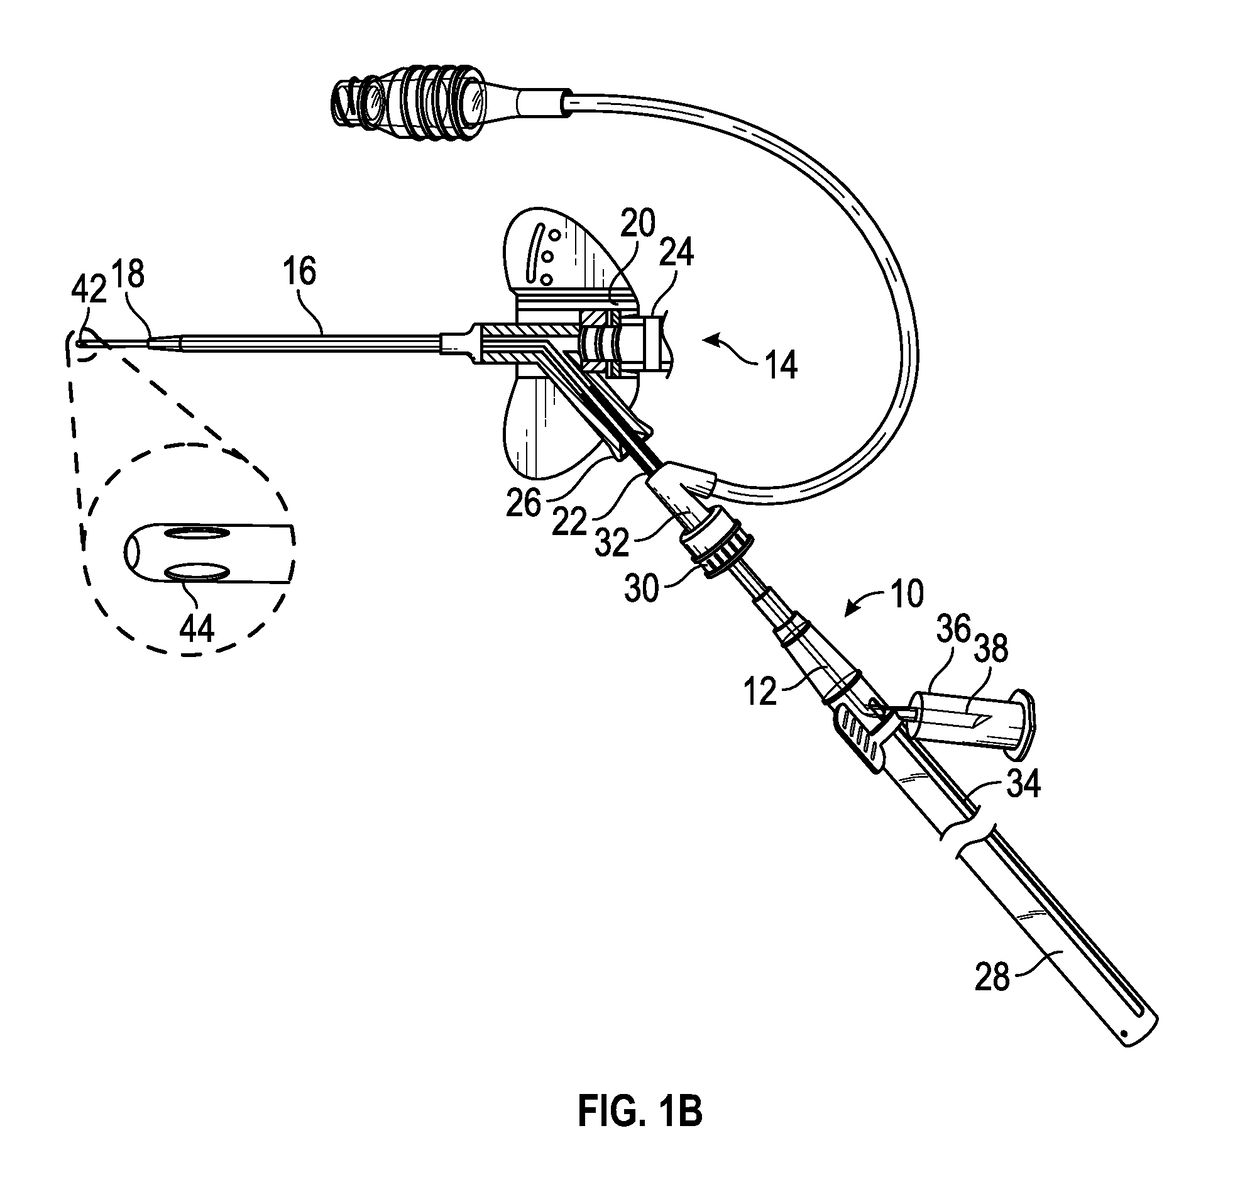 Extension housing a probe or intravenous catheter